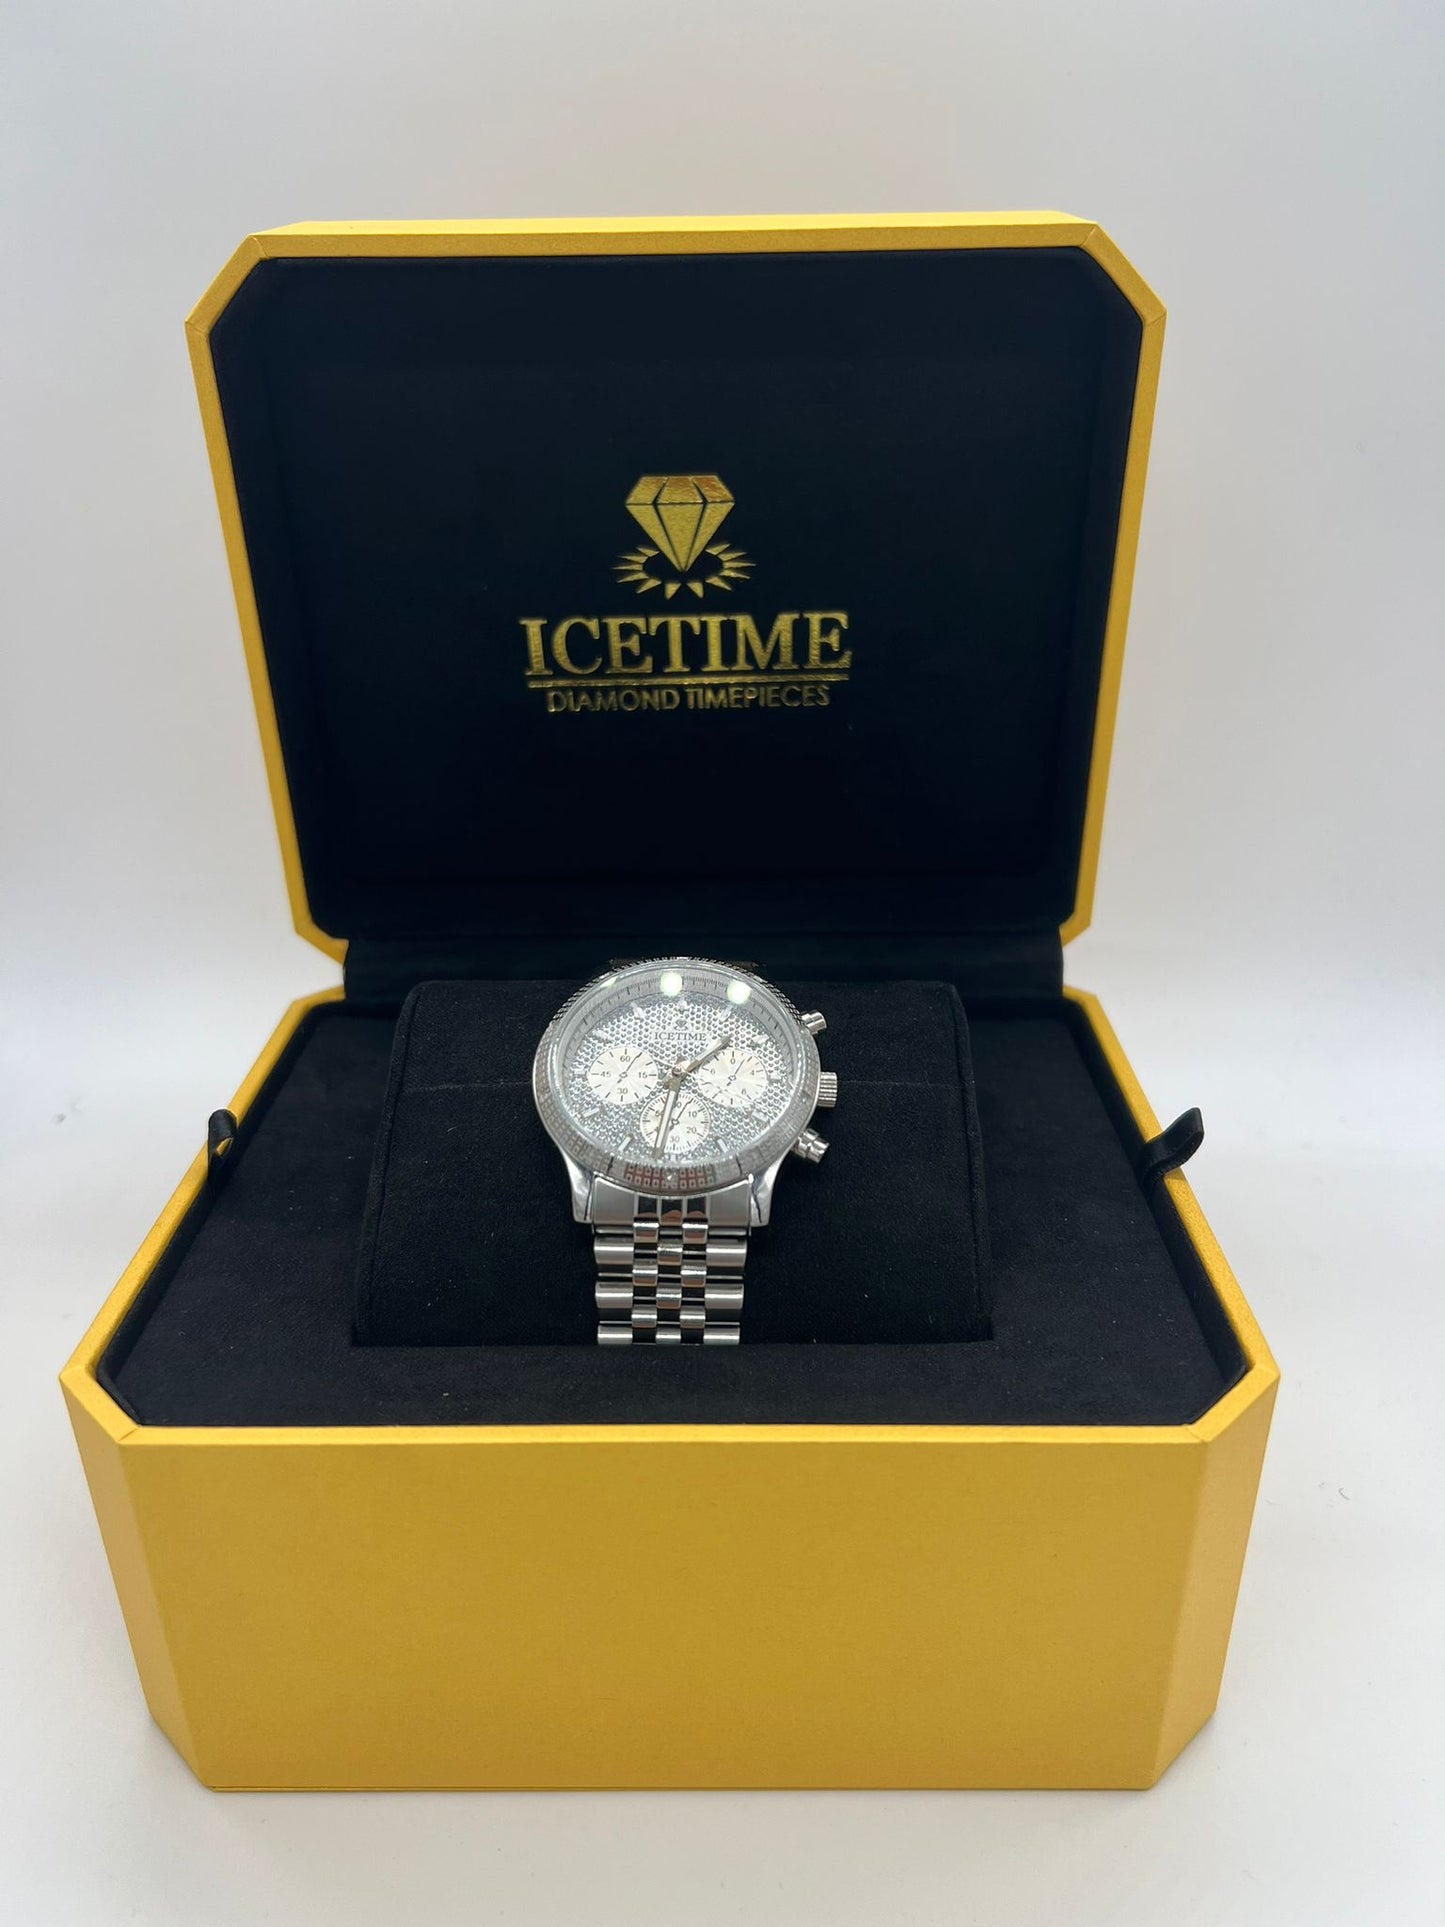 Certified Ice Time Watch with Diamonds